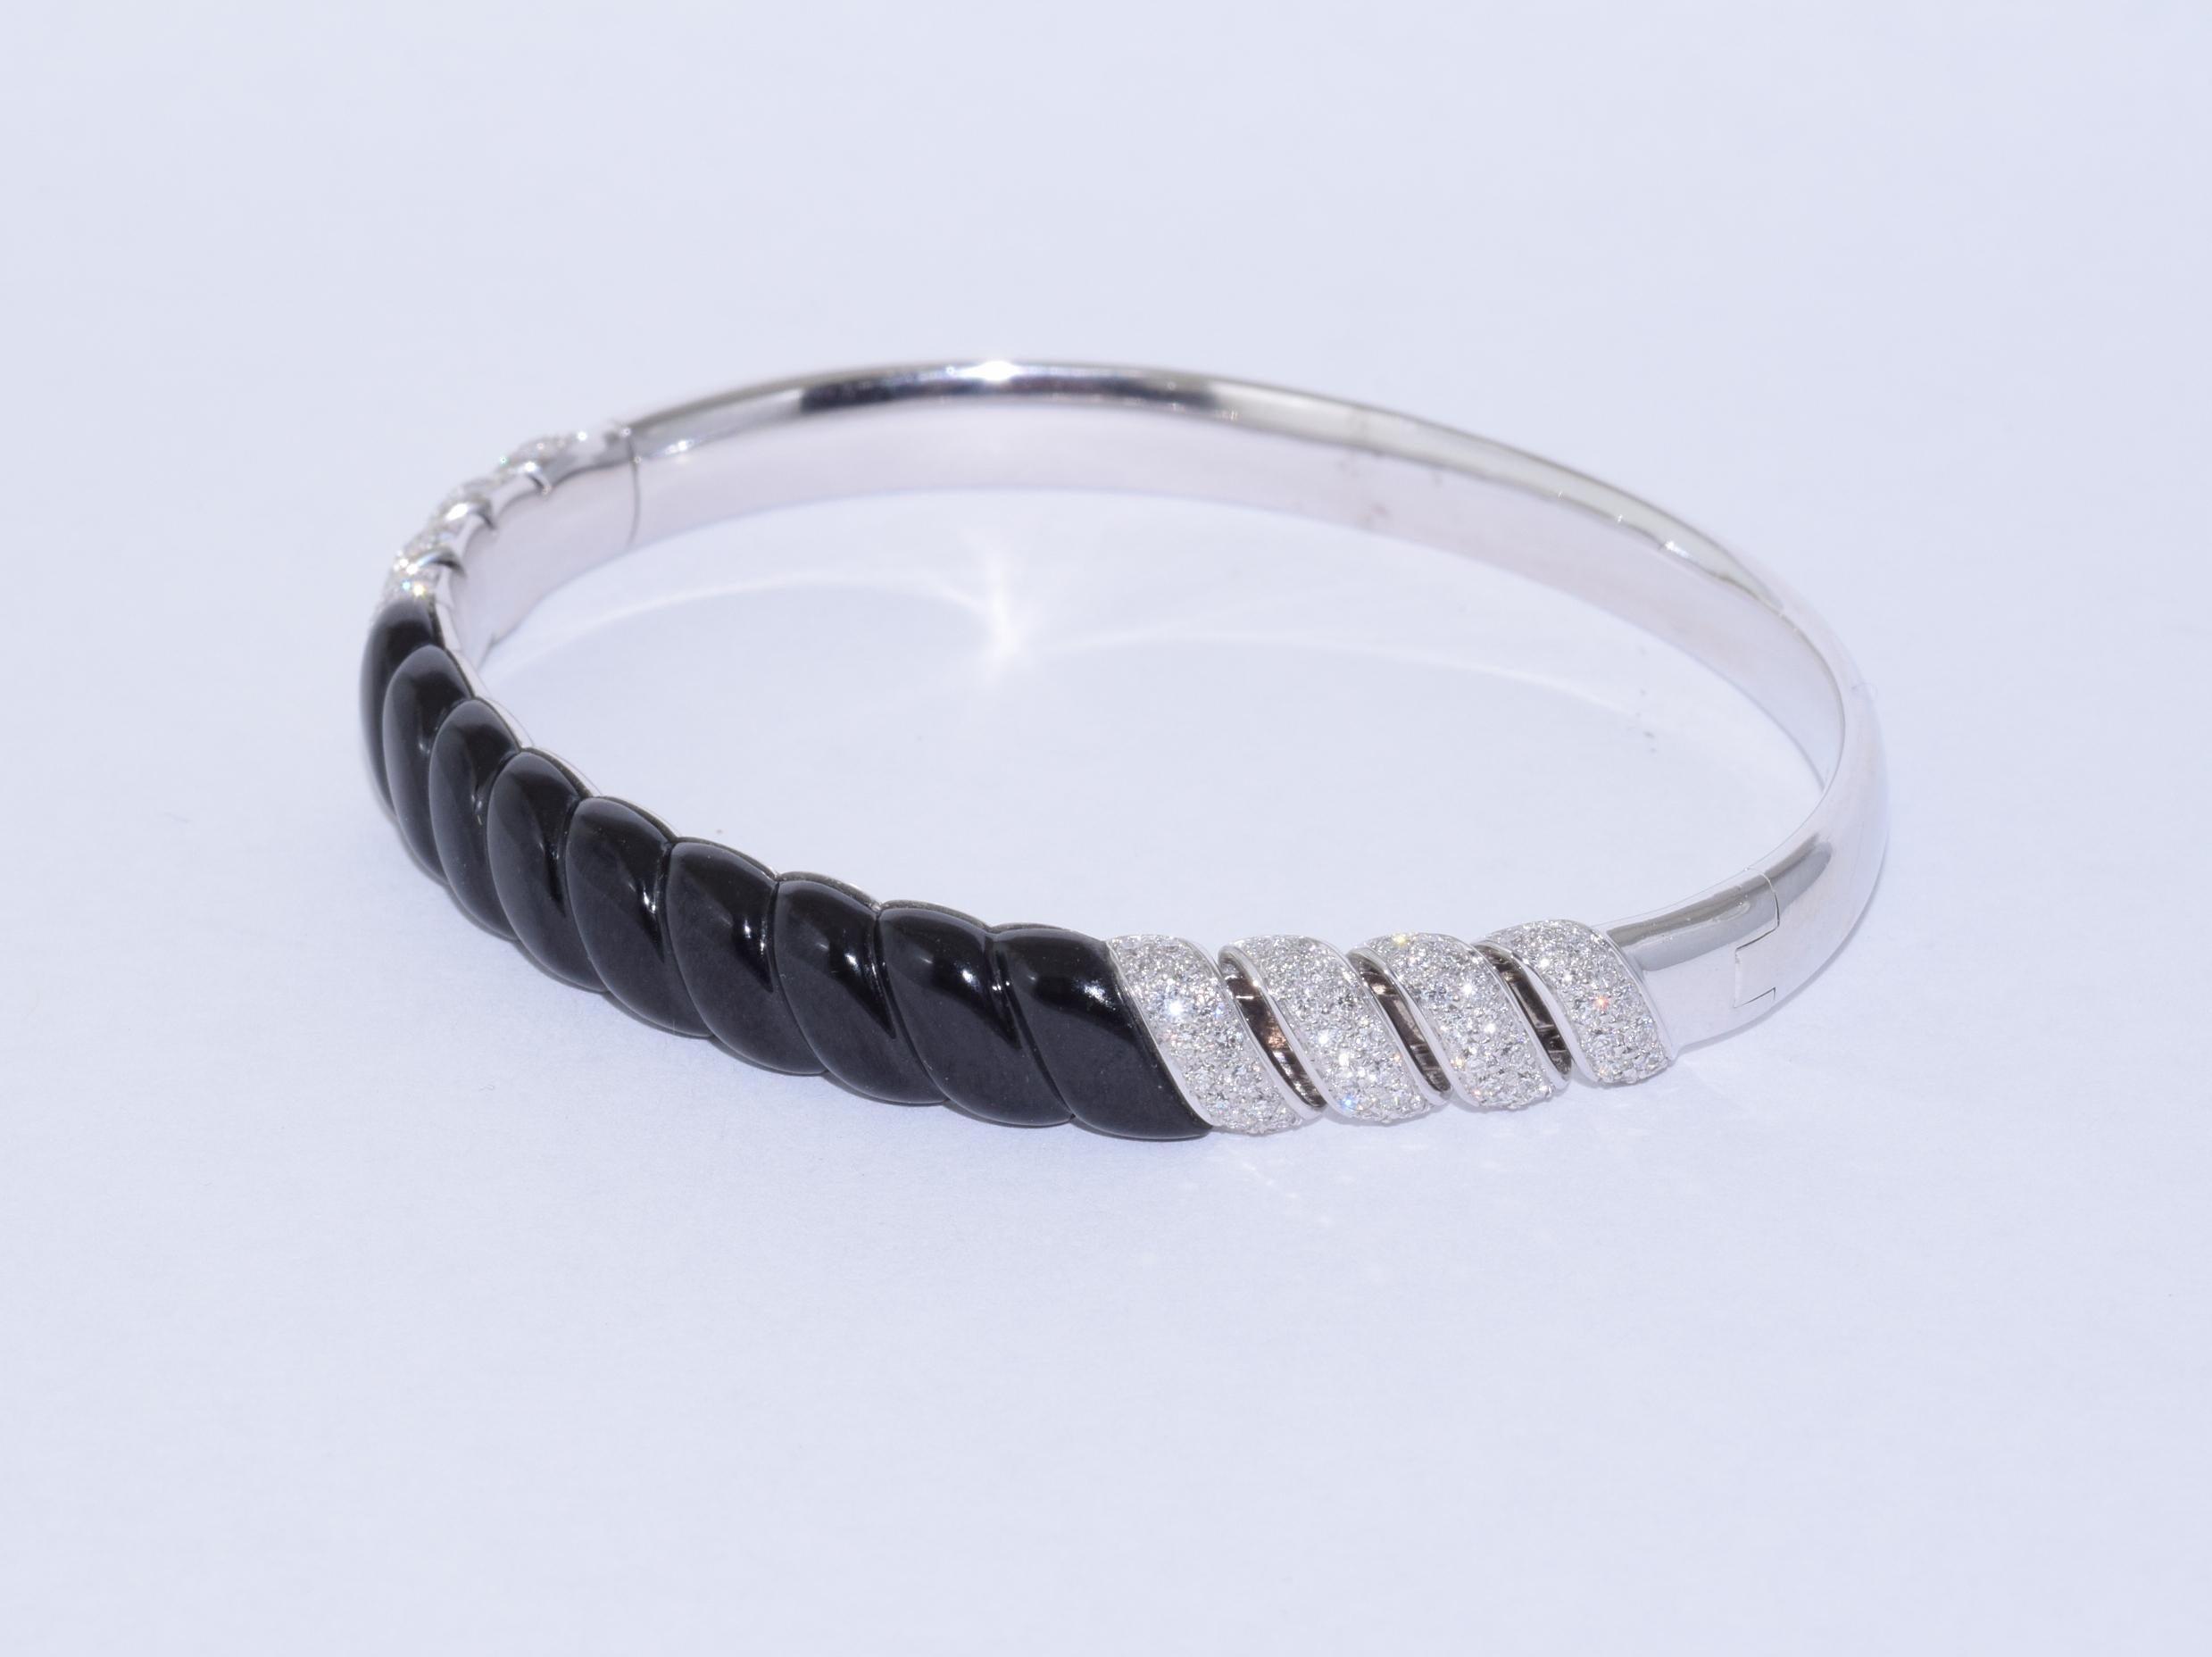 A hinged bangle topped with a carved black jade torsade shape is accented with round diamonds totaling approximately 1.11 carats mounted in 18 karat white gold. The bangle measures approximately 0.3 inch wide, with interior dimensions of 2.25in x